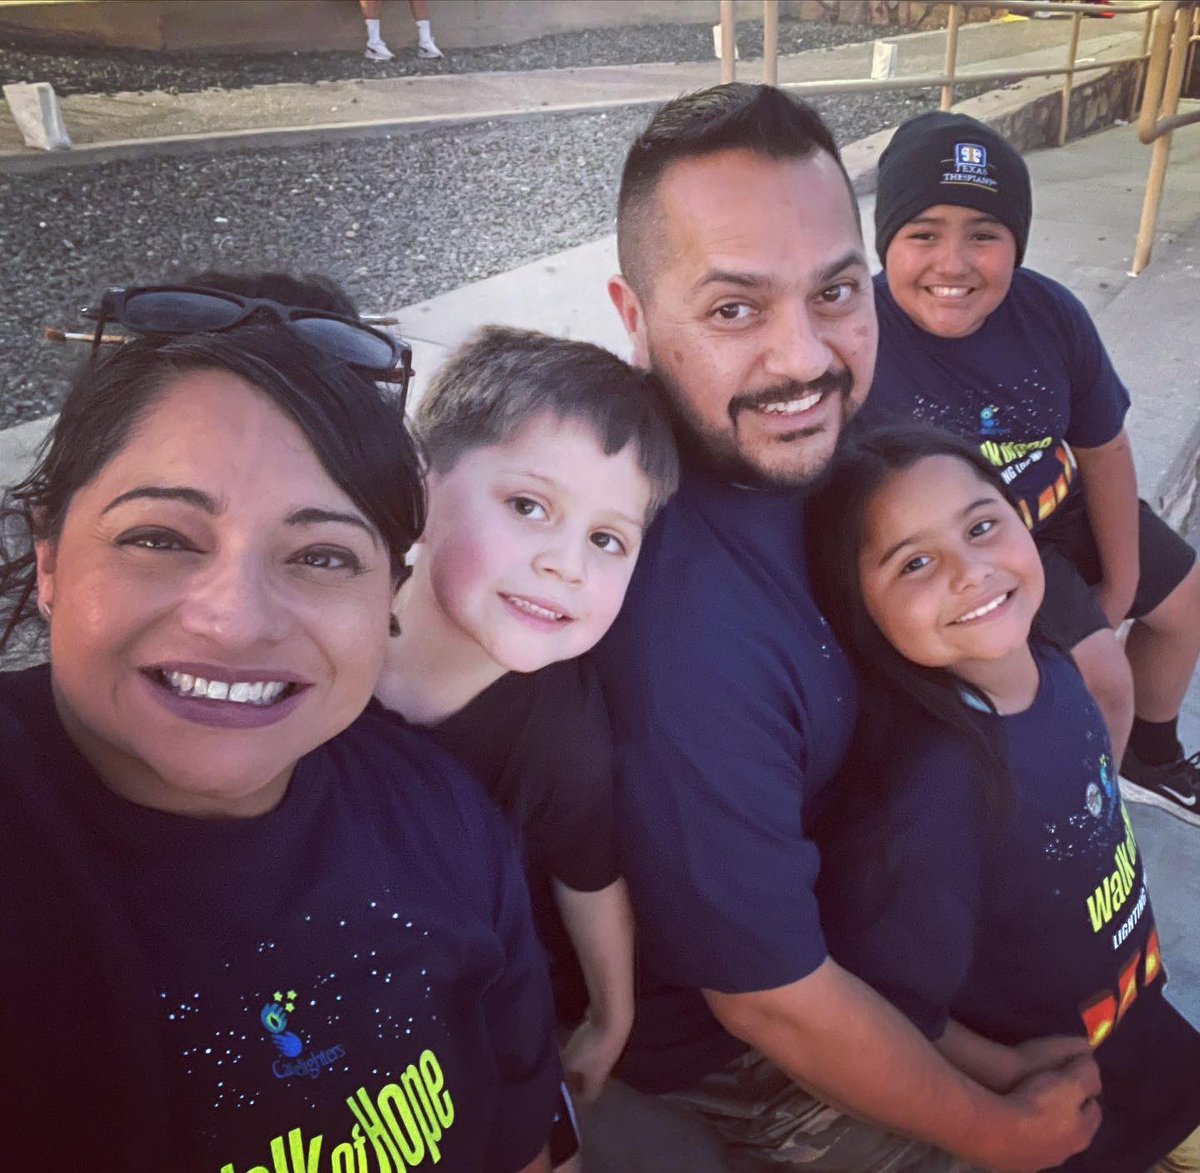 Finished the day with The Walk of Hope💛💛🎗️🎗️ hosted by The Candlelighters of El Paso. So many families bonded together by our lights of hope and gold ribbons. 🕯️ God bless our children🕊️ #ArnoldStrong   
Don’t forget… Go GOLD in Sept. 💛🎗️